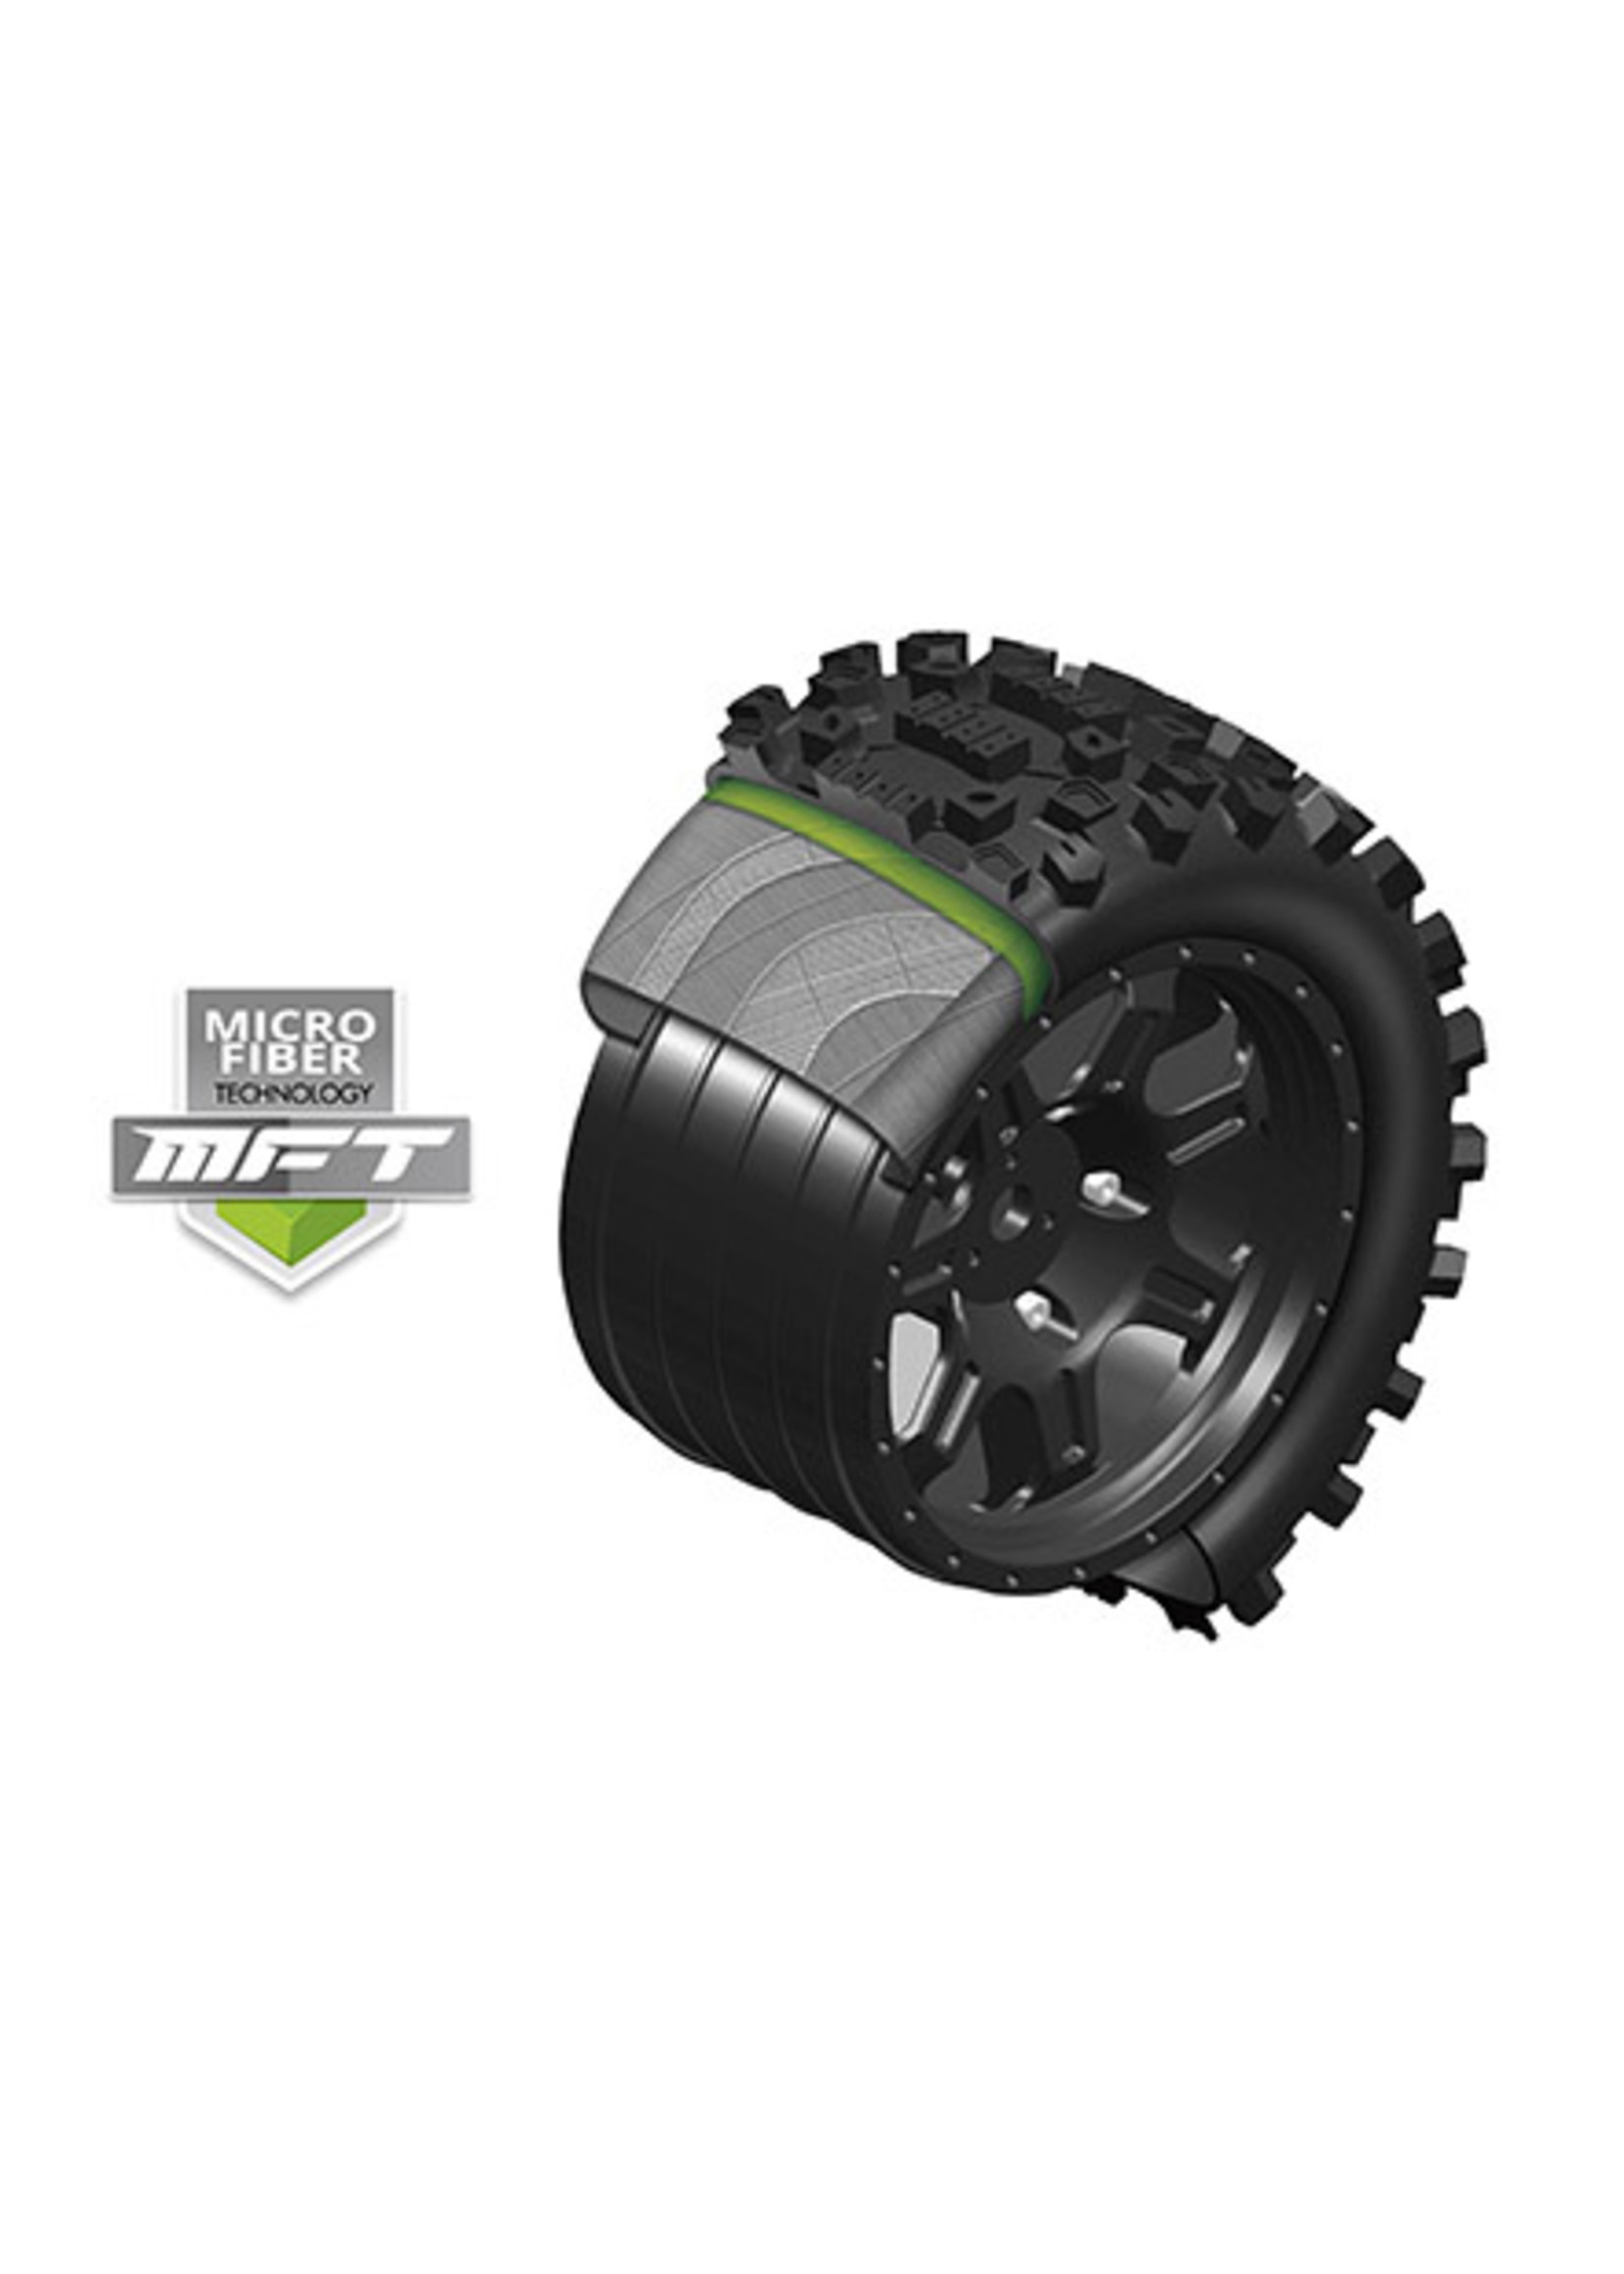 Duratrax DTXC5500 - Bandito X Belted Mounted Tires 24mm - Black